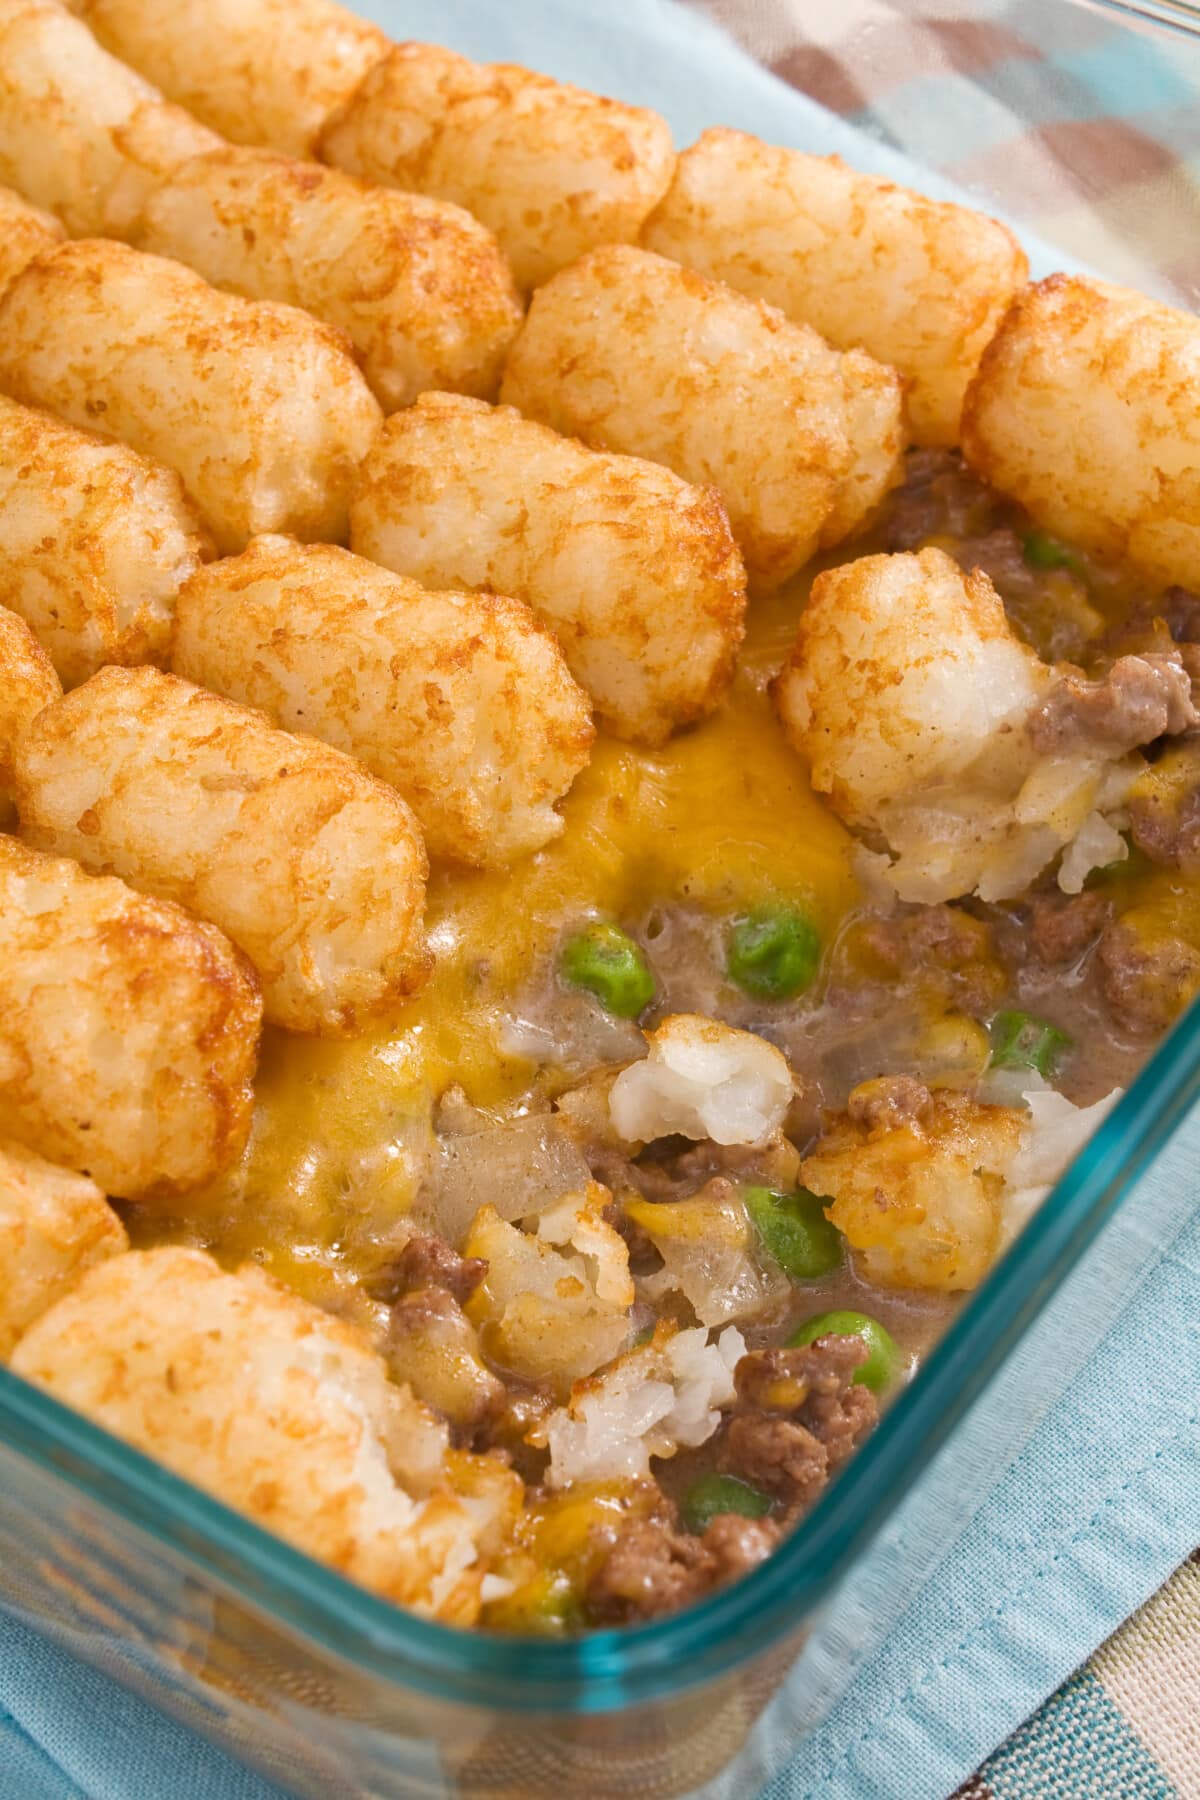 Tater Tot Casserole in a glass baking dish